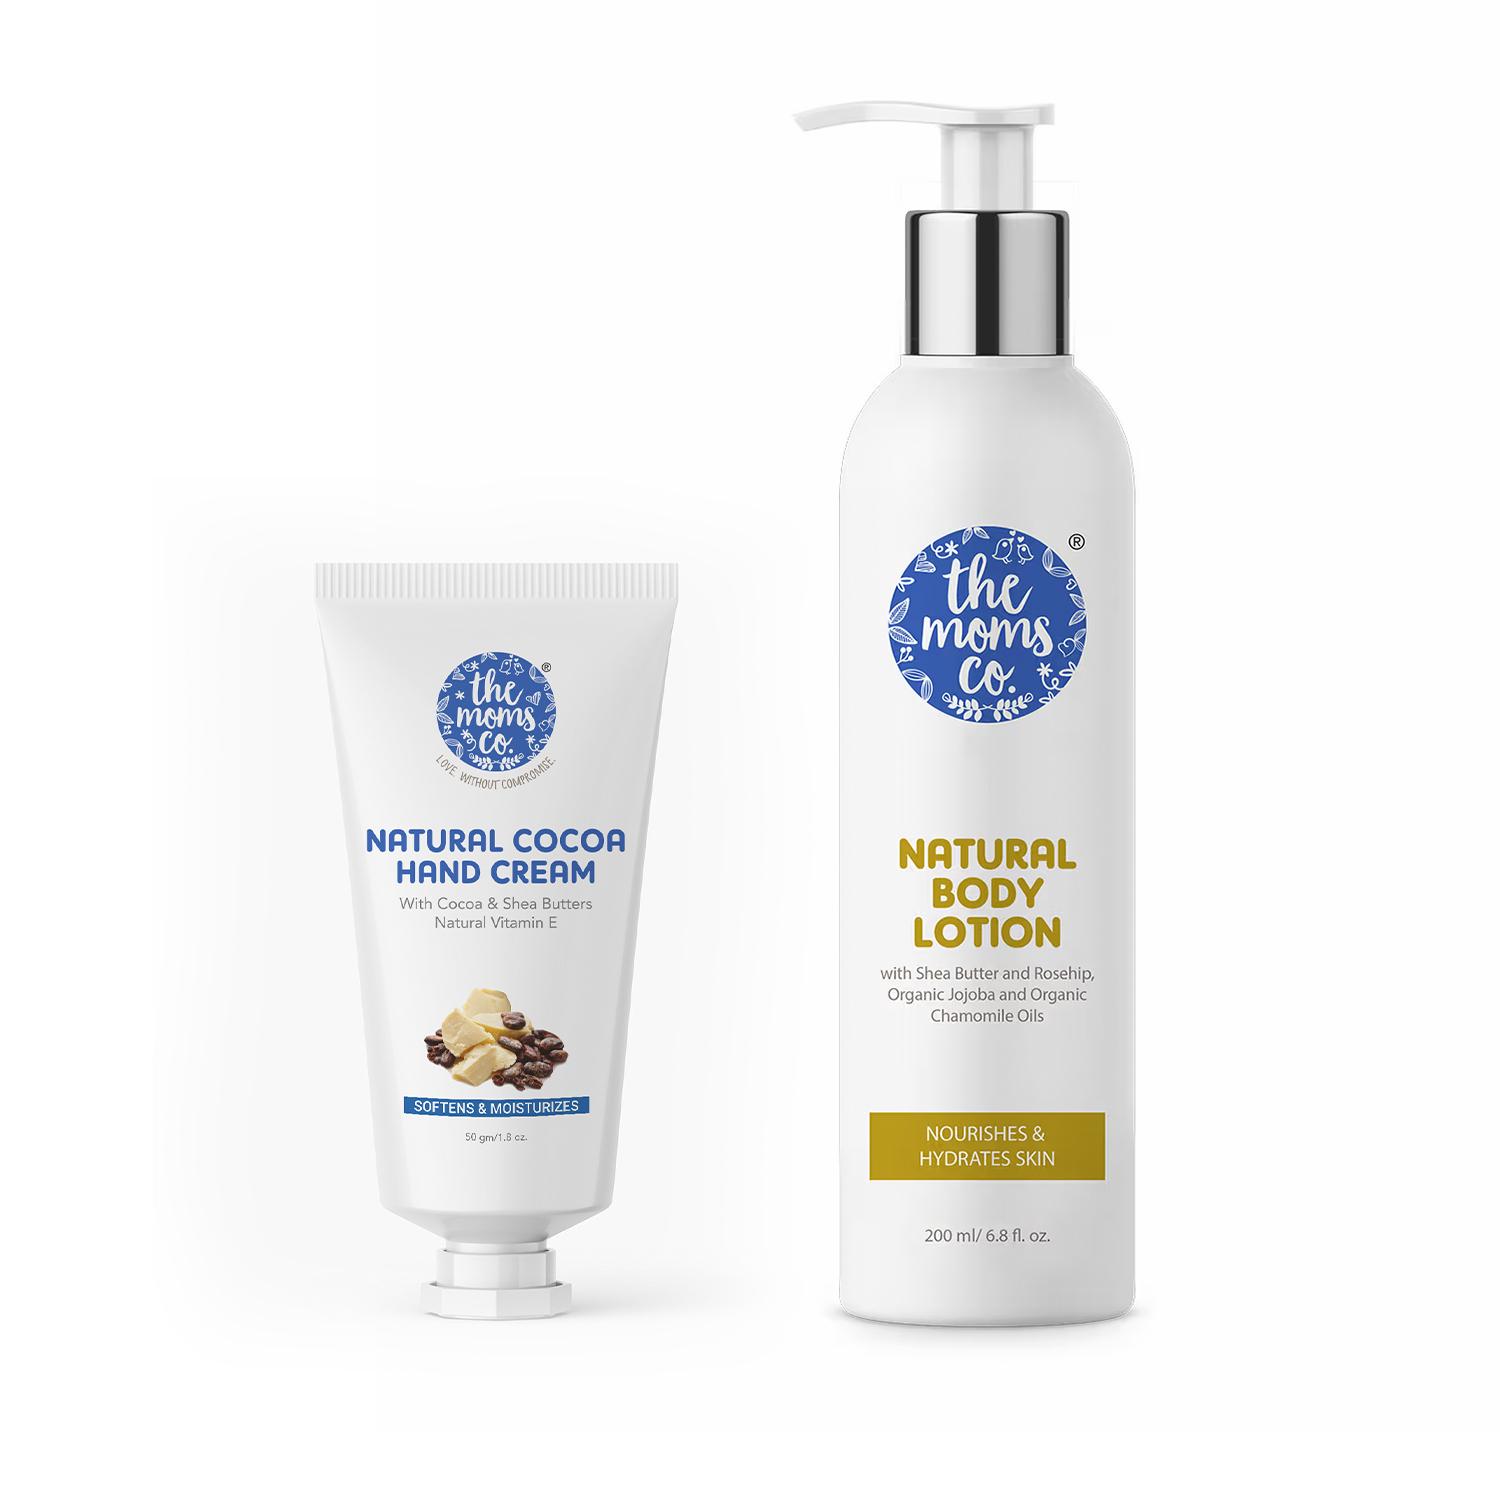 The Mom's Co. | The Mom's Co. Natural Foot Cream & Natural Body Lotion Combo